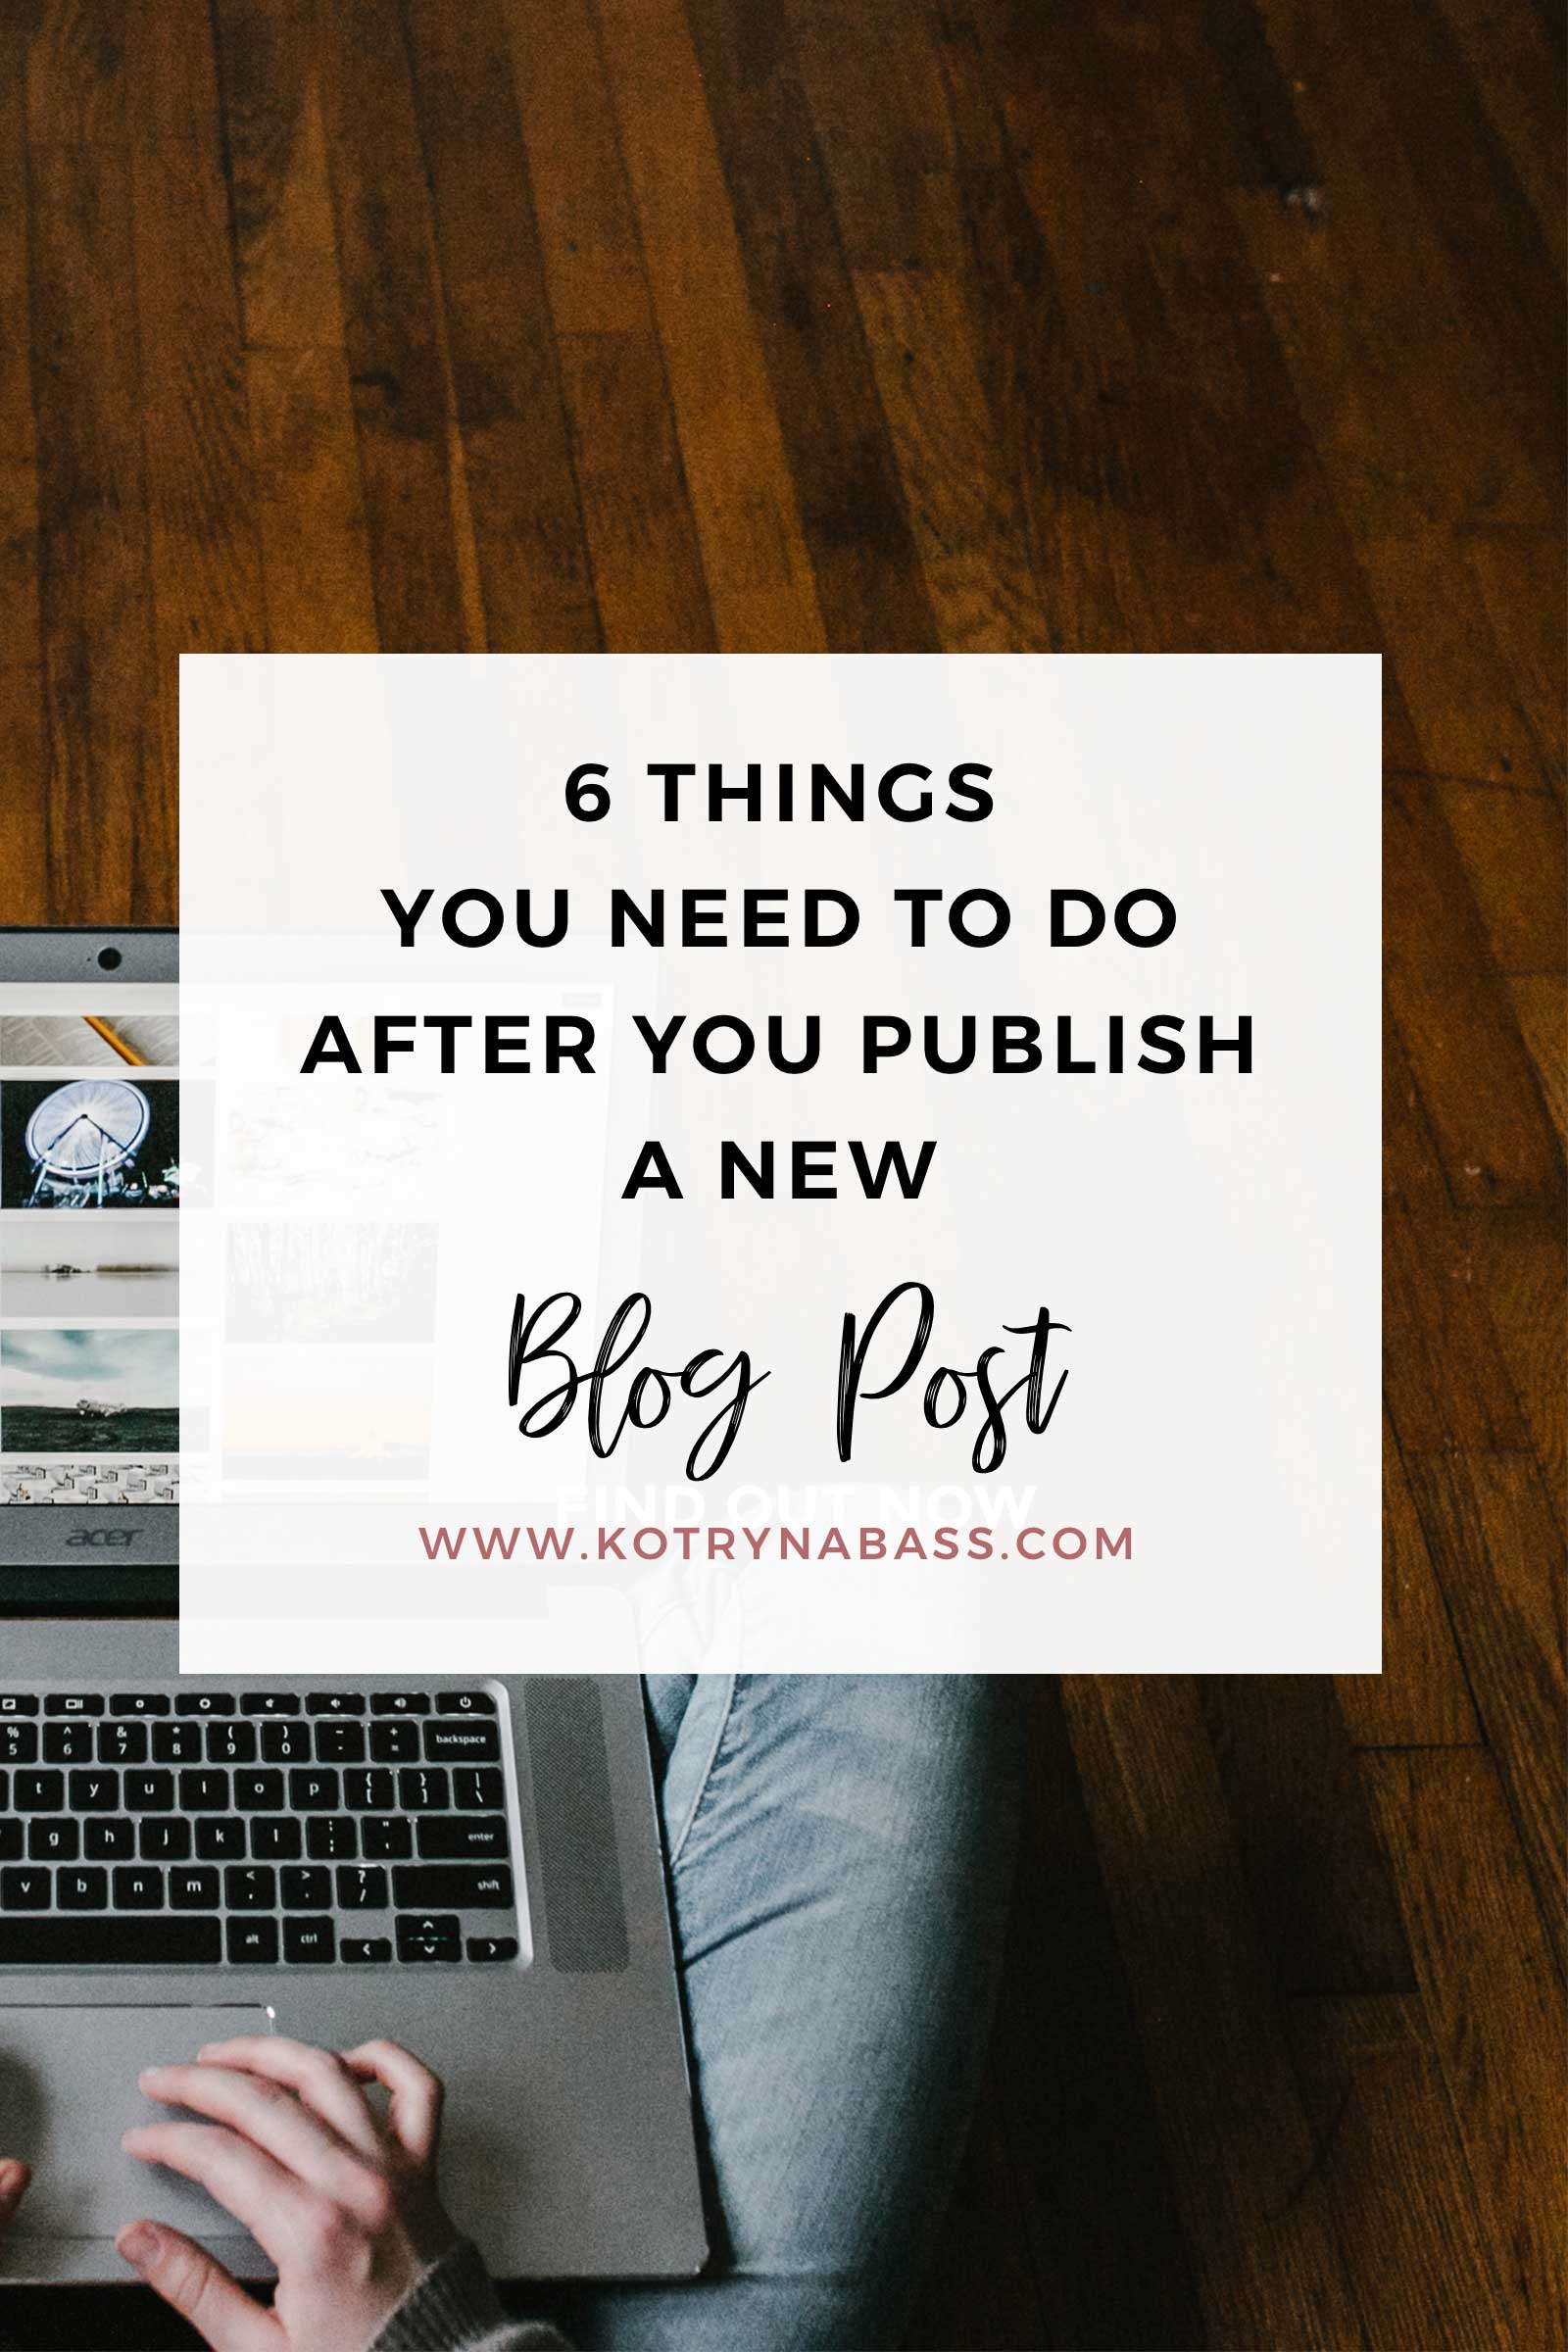 So you have just published that fresh blog post? Here are 6 things you need to do now...